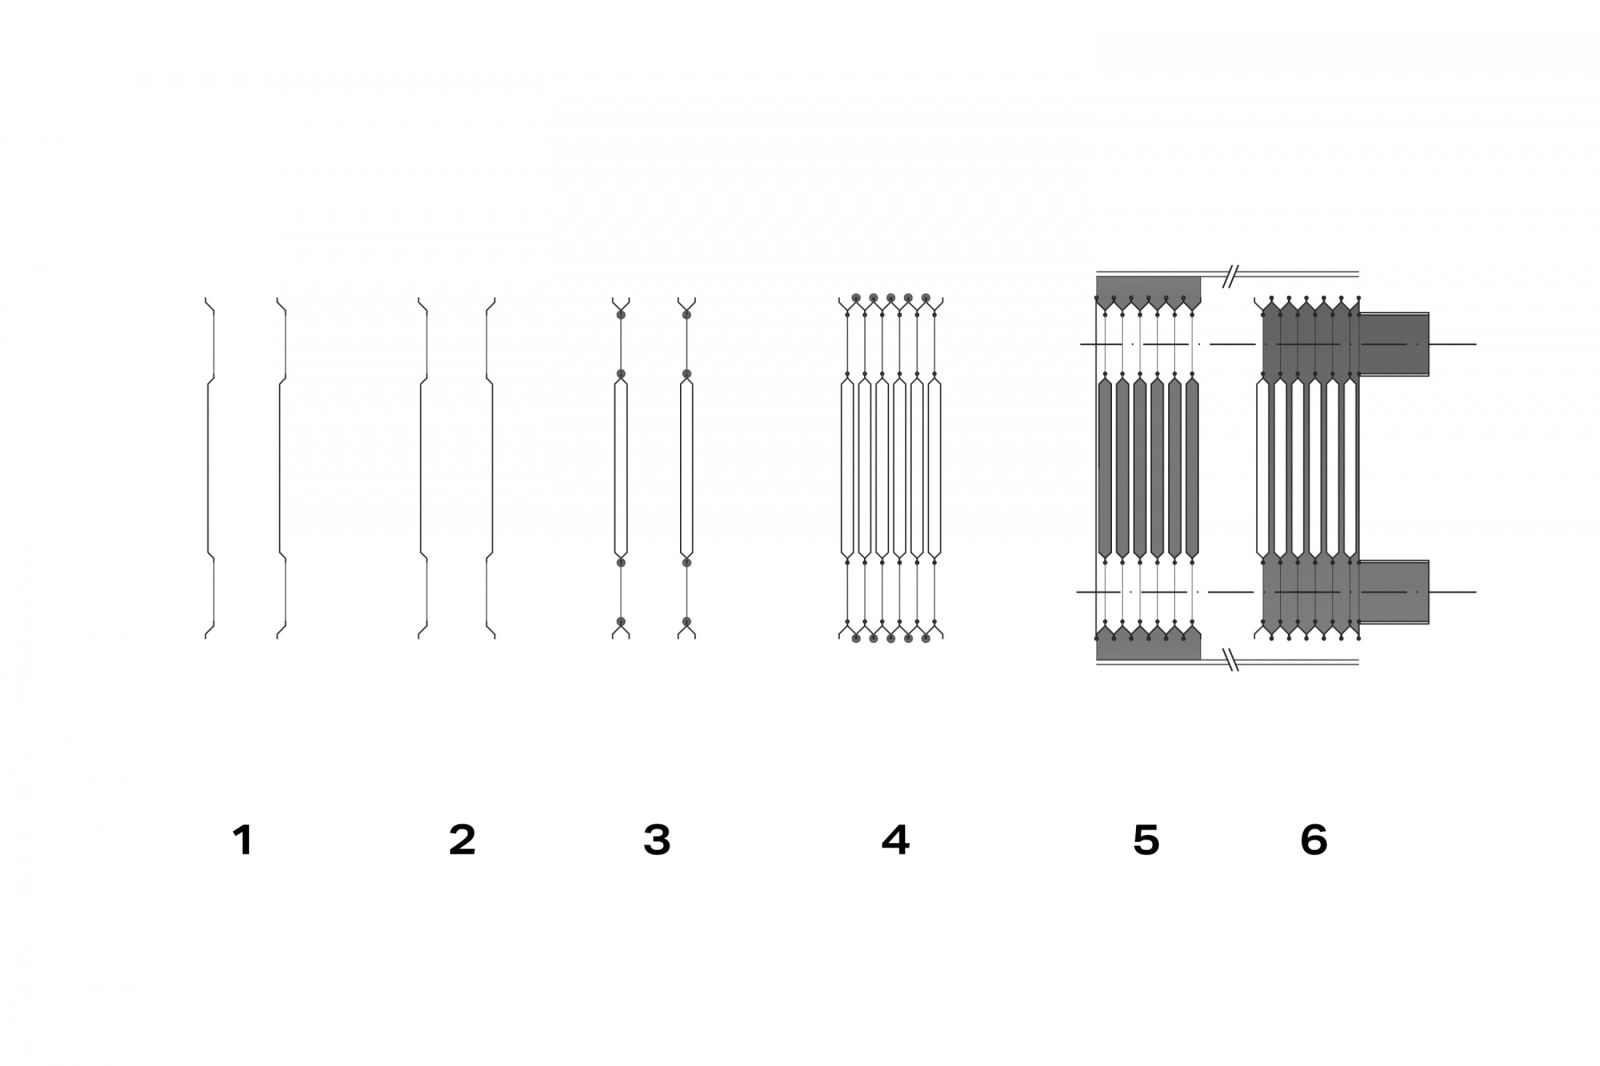 Plate pack assembly (1 = plates (see A above); 2 = one plate turned 180° (see B above); 3 = plate pair assembling (welding holes); 4 = plate pack assembling (outside welding); 5 = shell side flow; 6 = plate side flow)